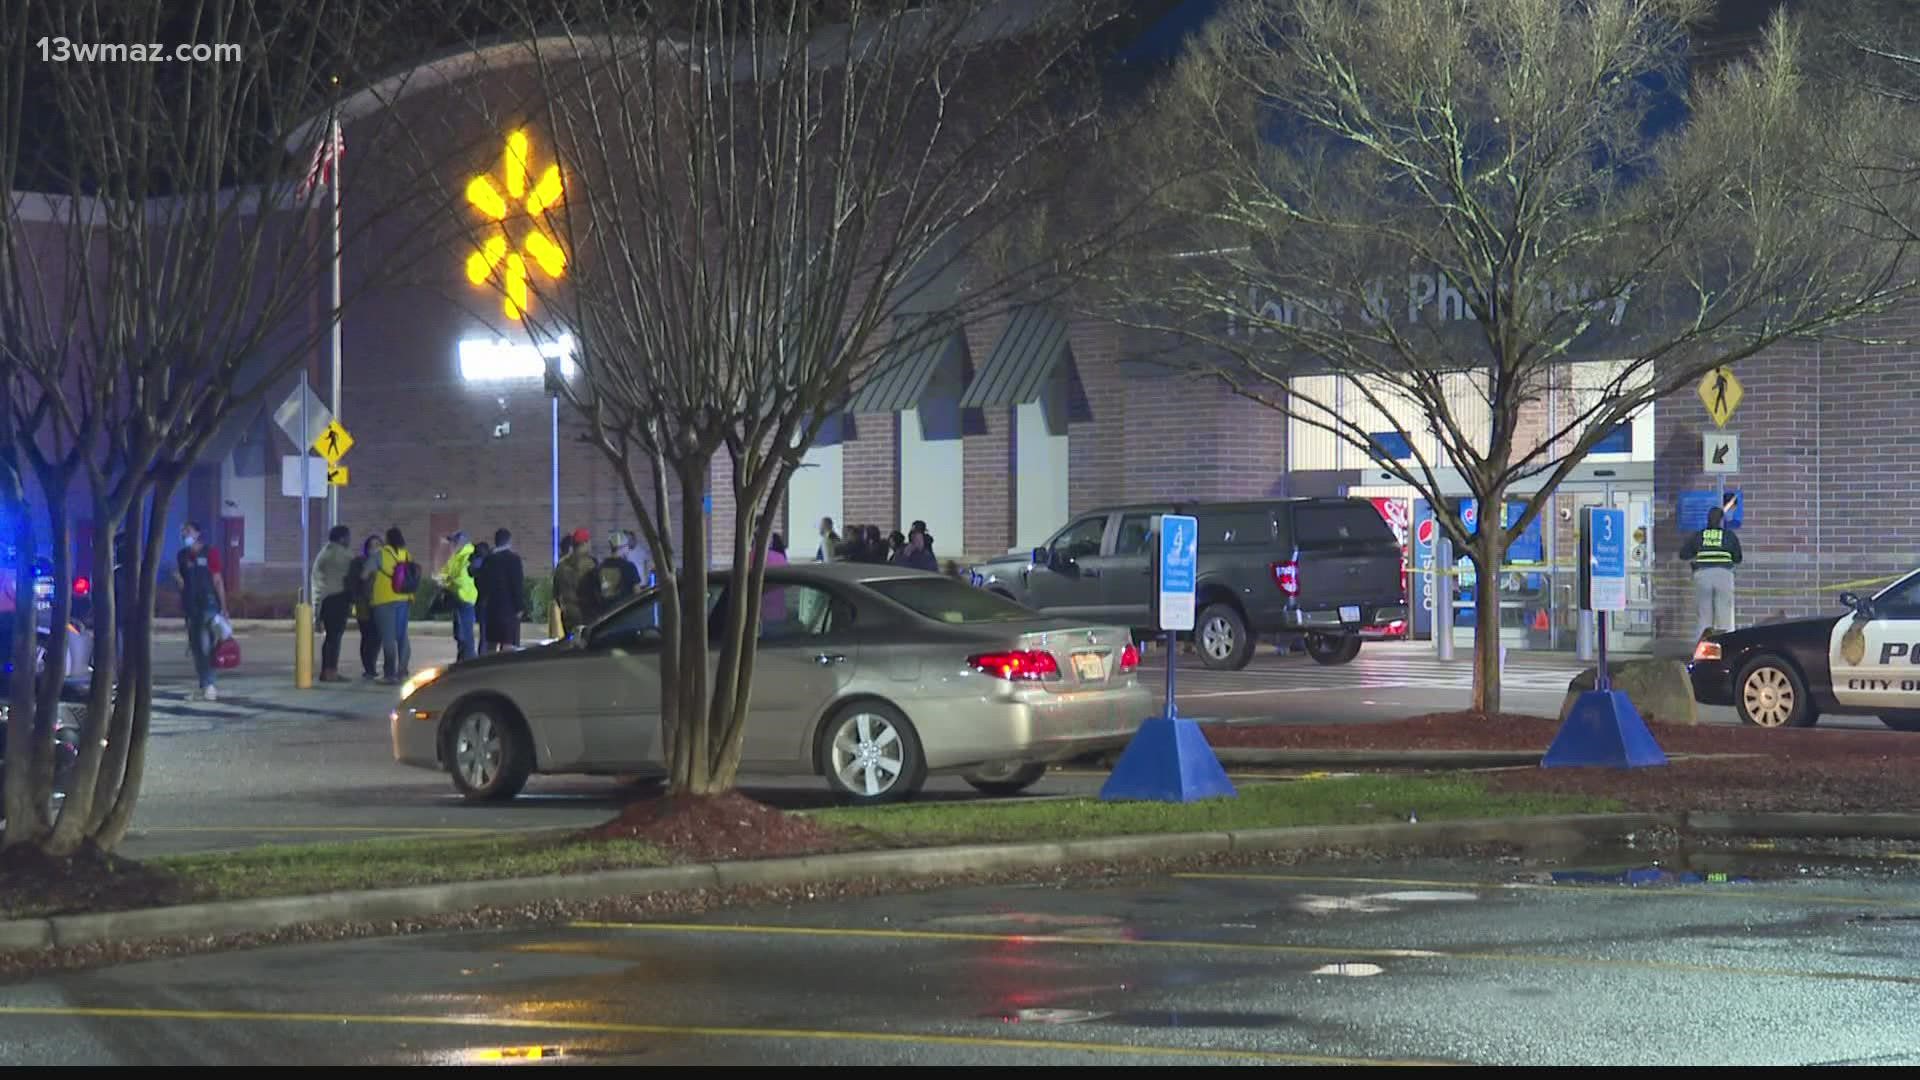 A teen is dead after a shooting at the Forsyth Walmart Sunday night. Monroe County Sheriff Brad Freeman says it happened around 6 p.m.